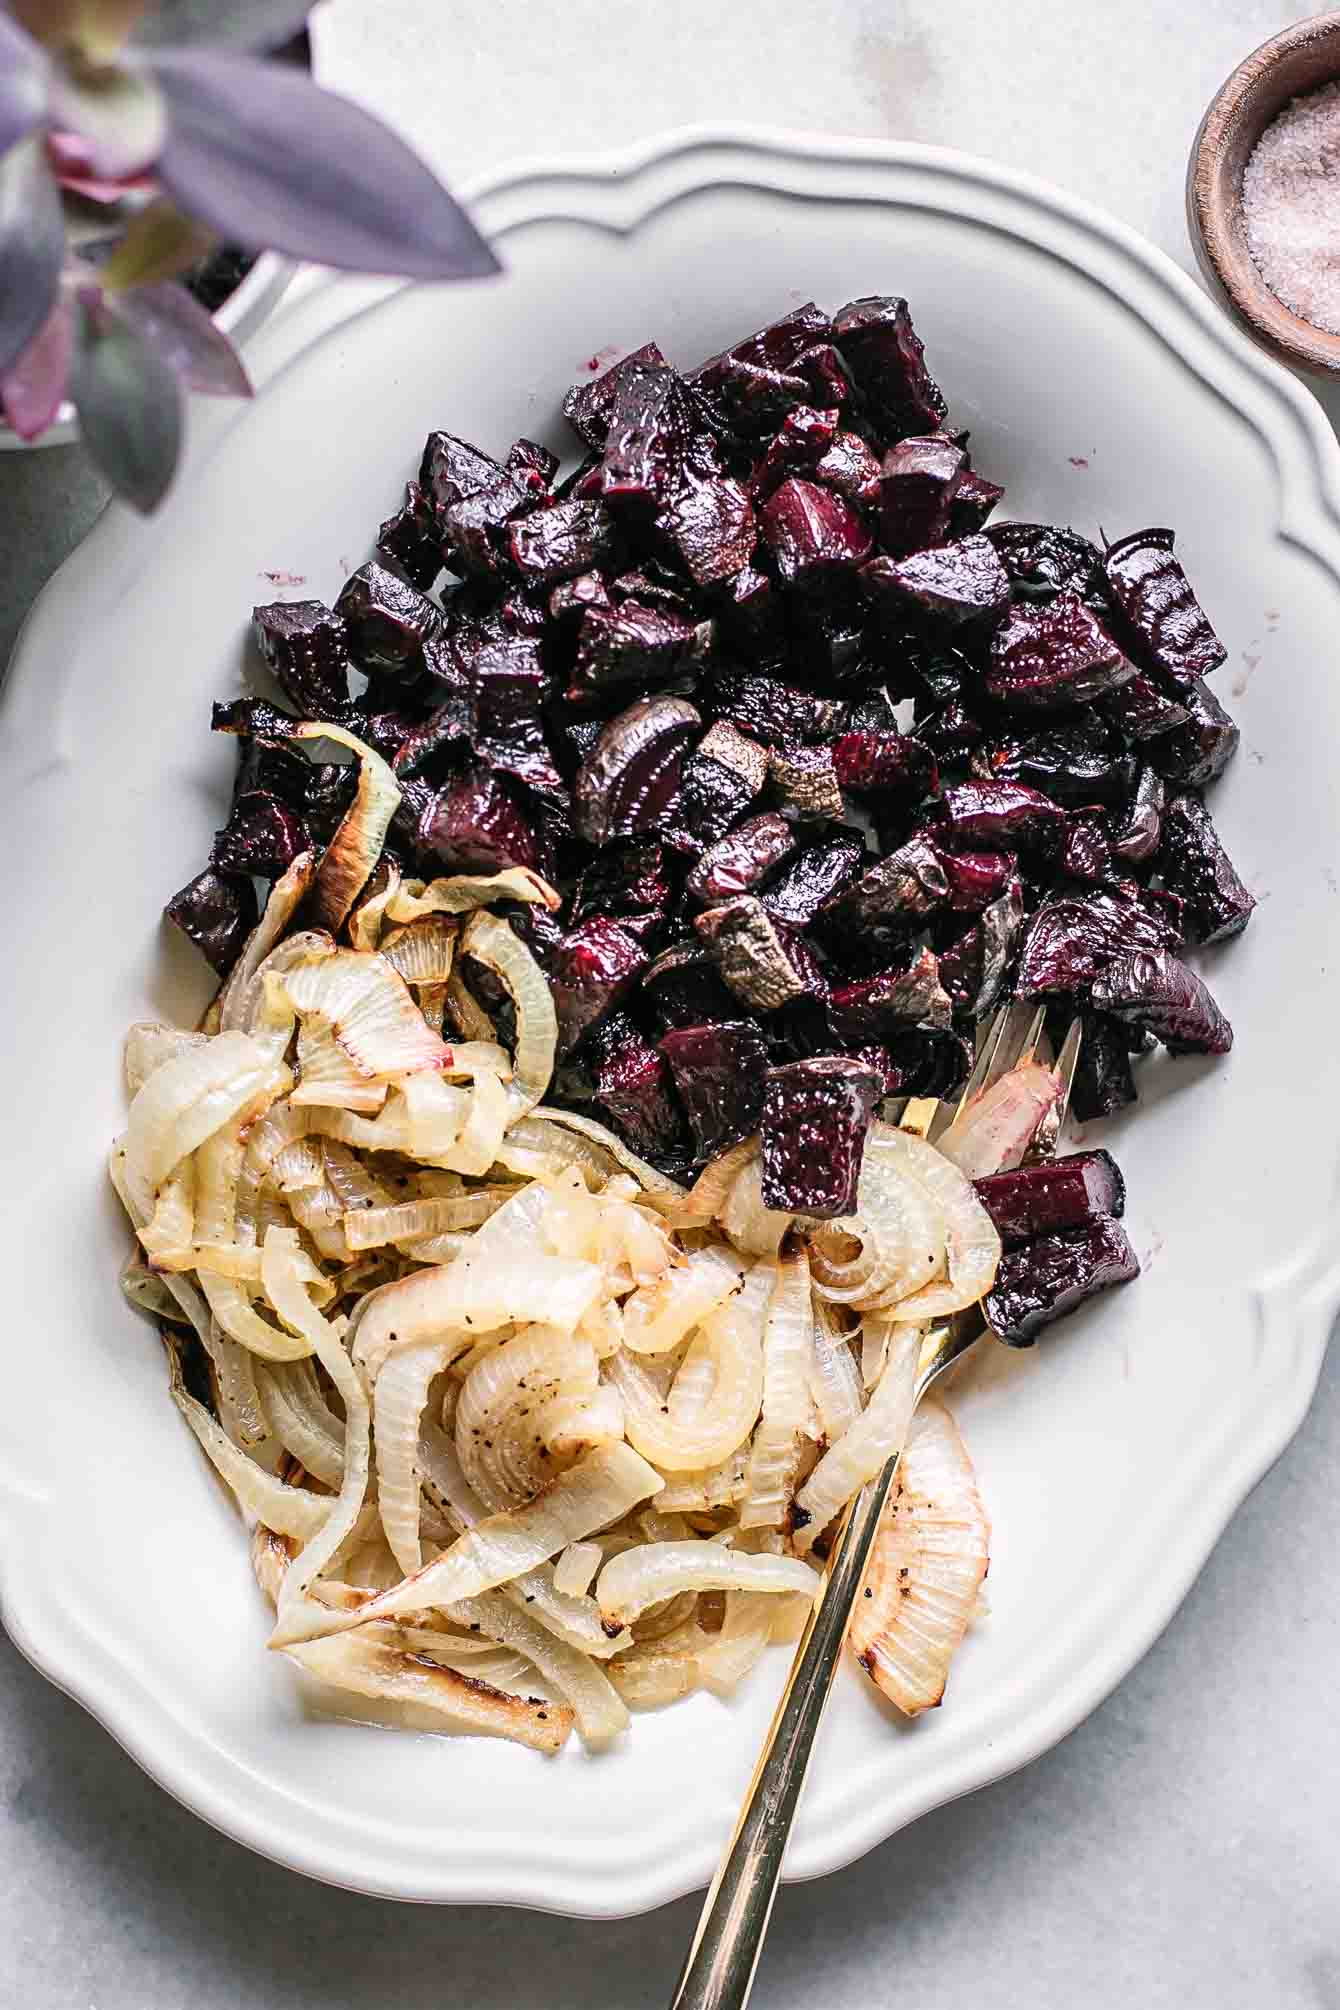 Roasted Beets and Onions